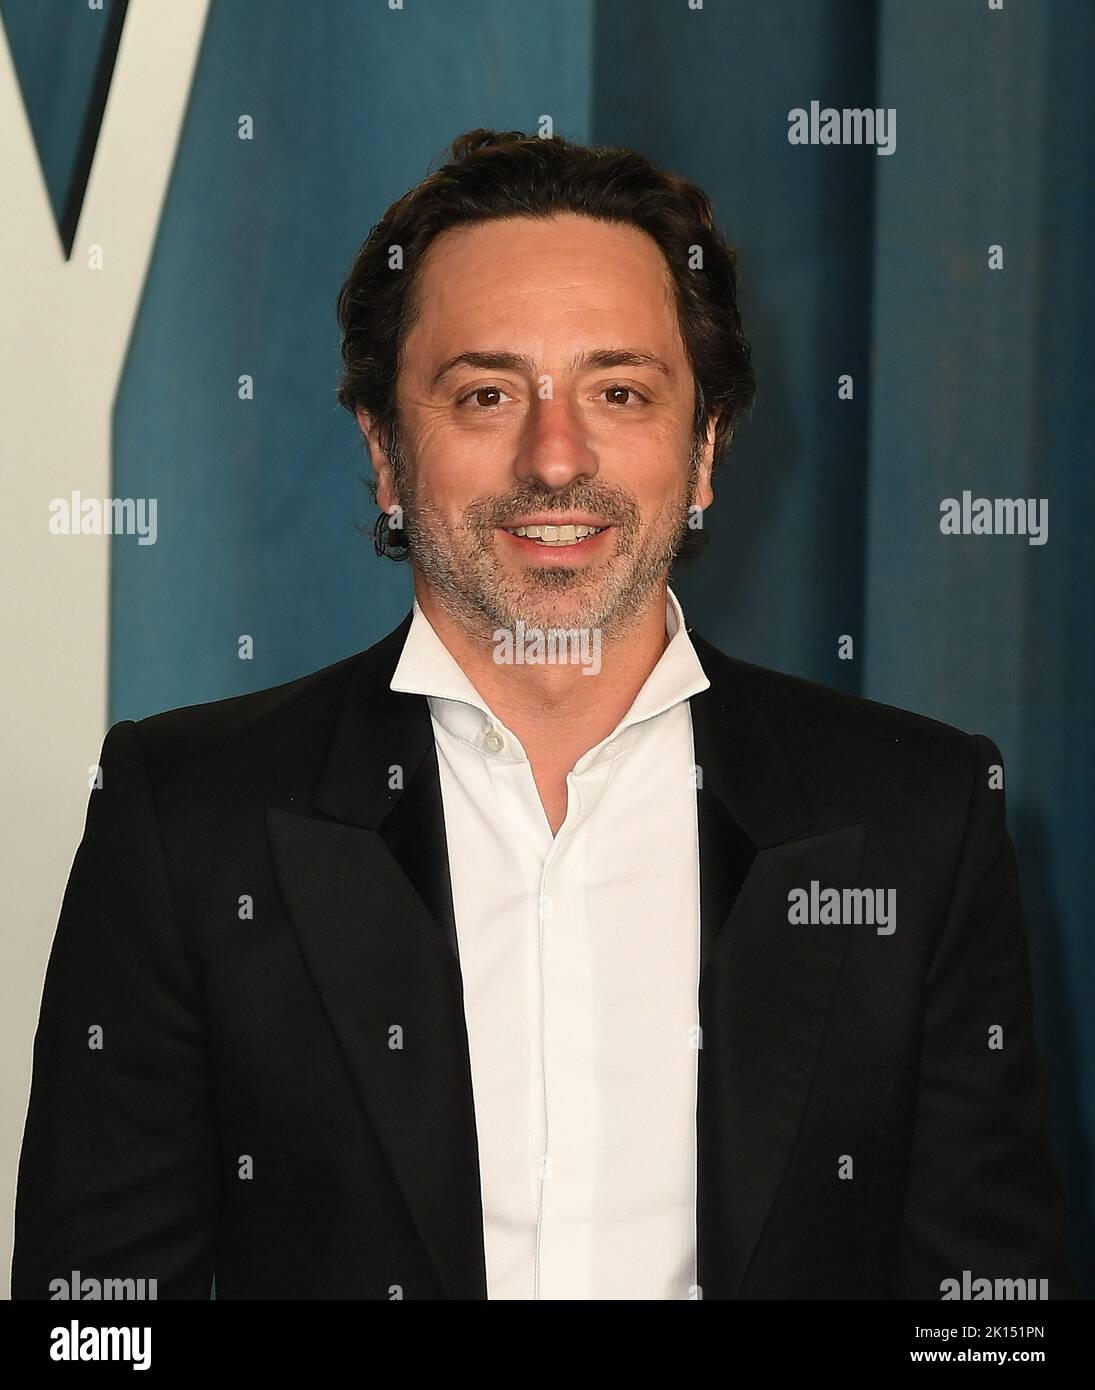 Sergey Brin attends the 2022 Vanity Fair Oscar Party hosted by Radhika Jones at Wallis Annenberg Center for the Performing Arts on March 27, 2022 in B Stock Photo